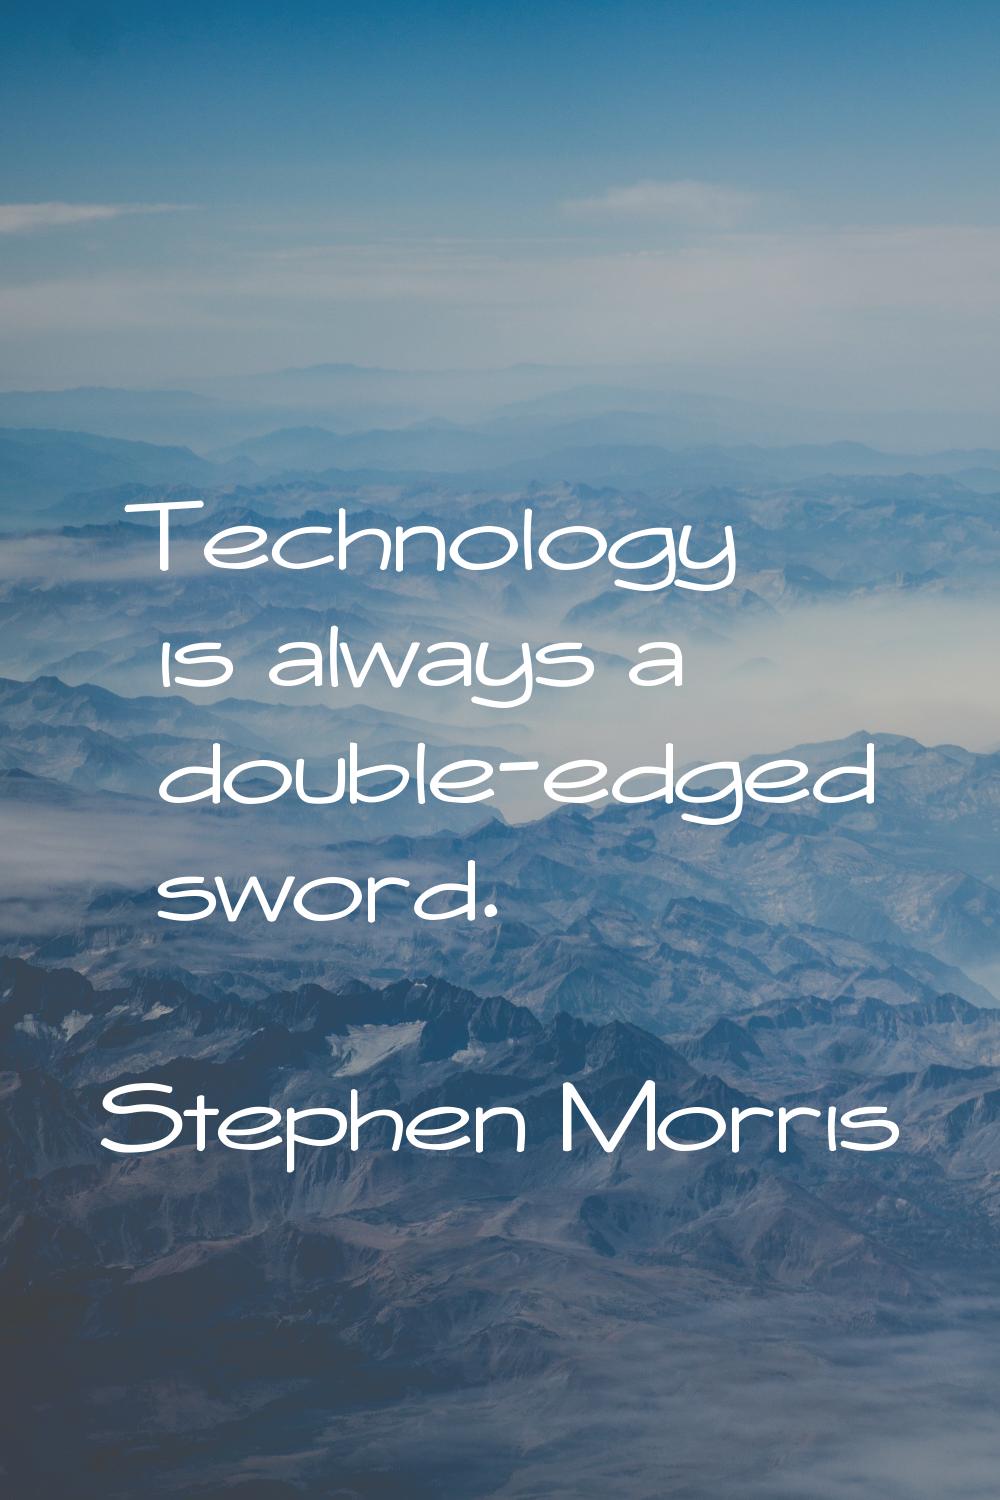 Technology is always a double-edged sword.